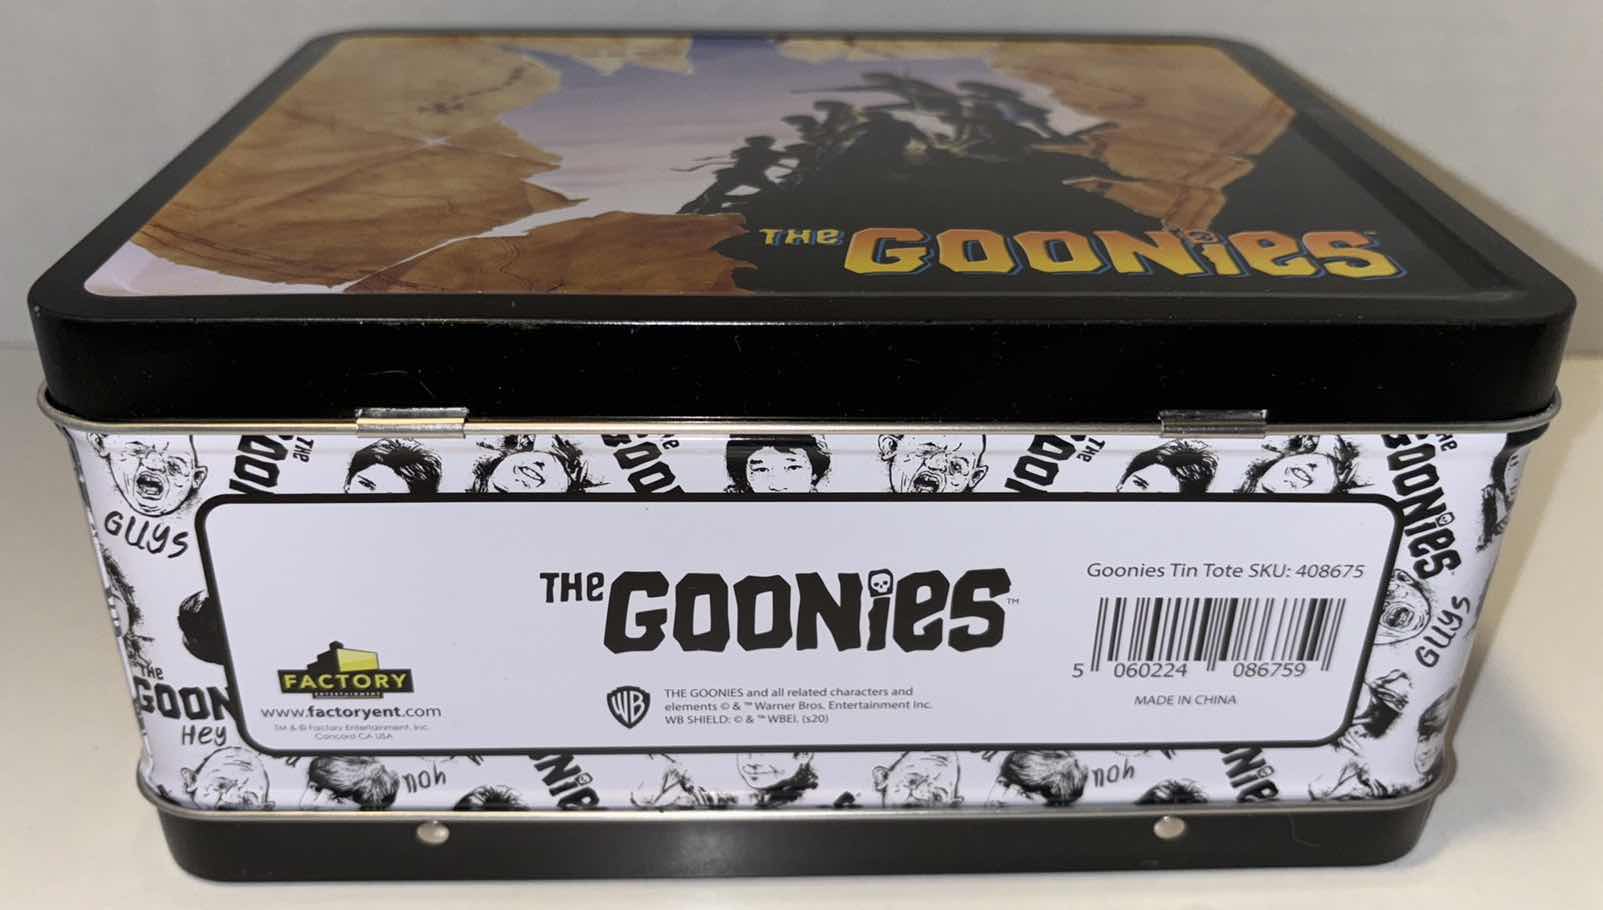 Photo 5 of NEW FACTORY ENTERTAINMENT TIN TOTE, “THE GOONIES”